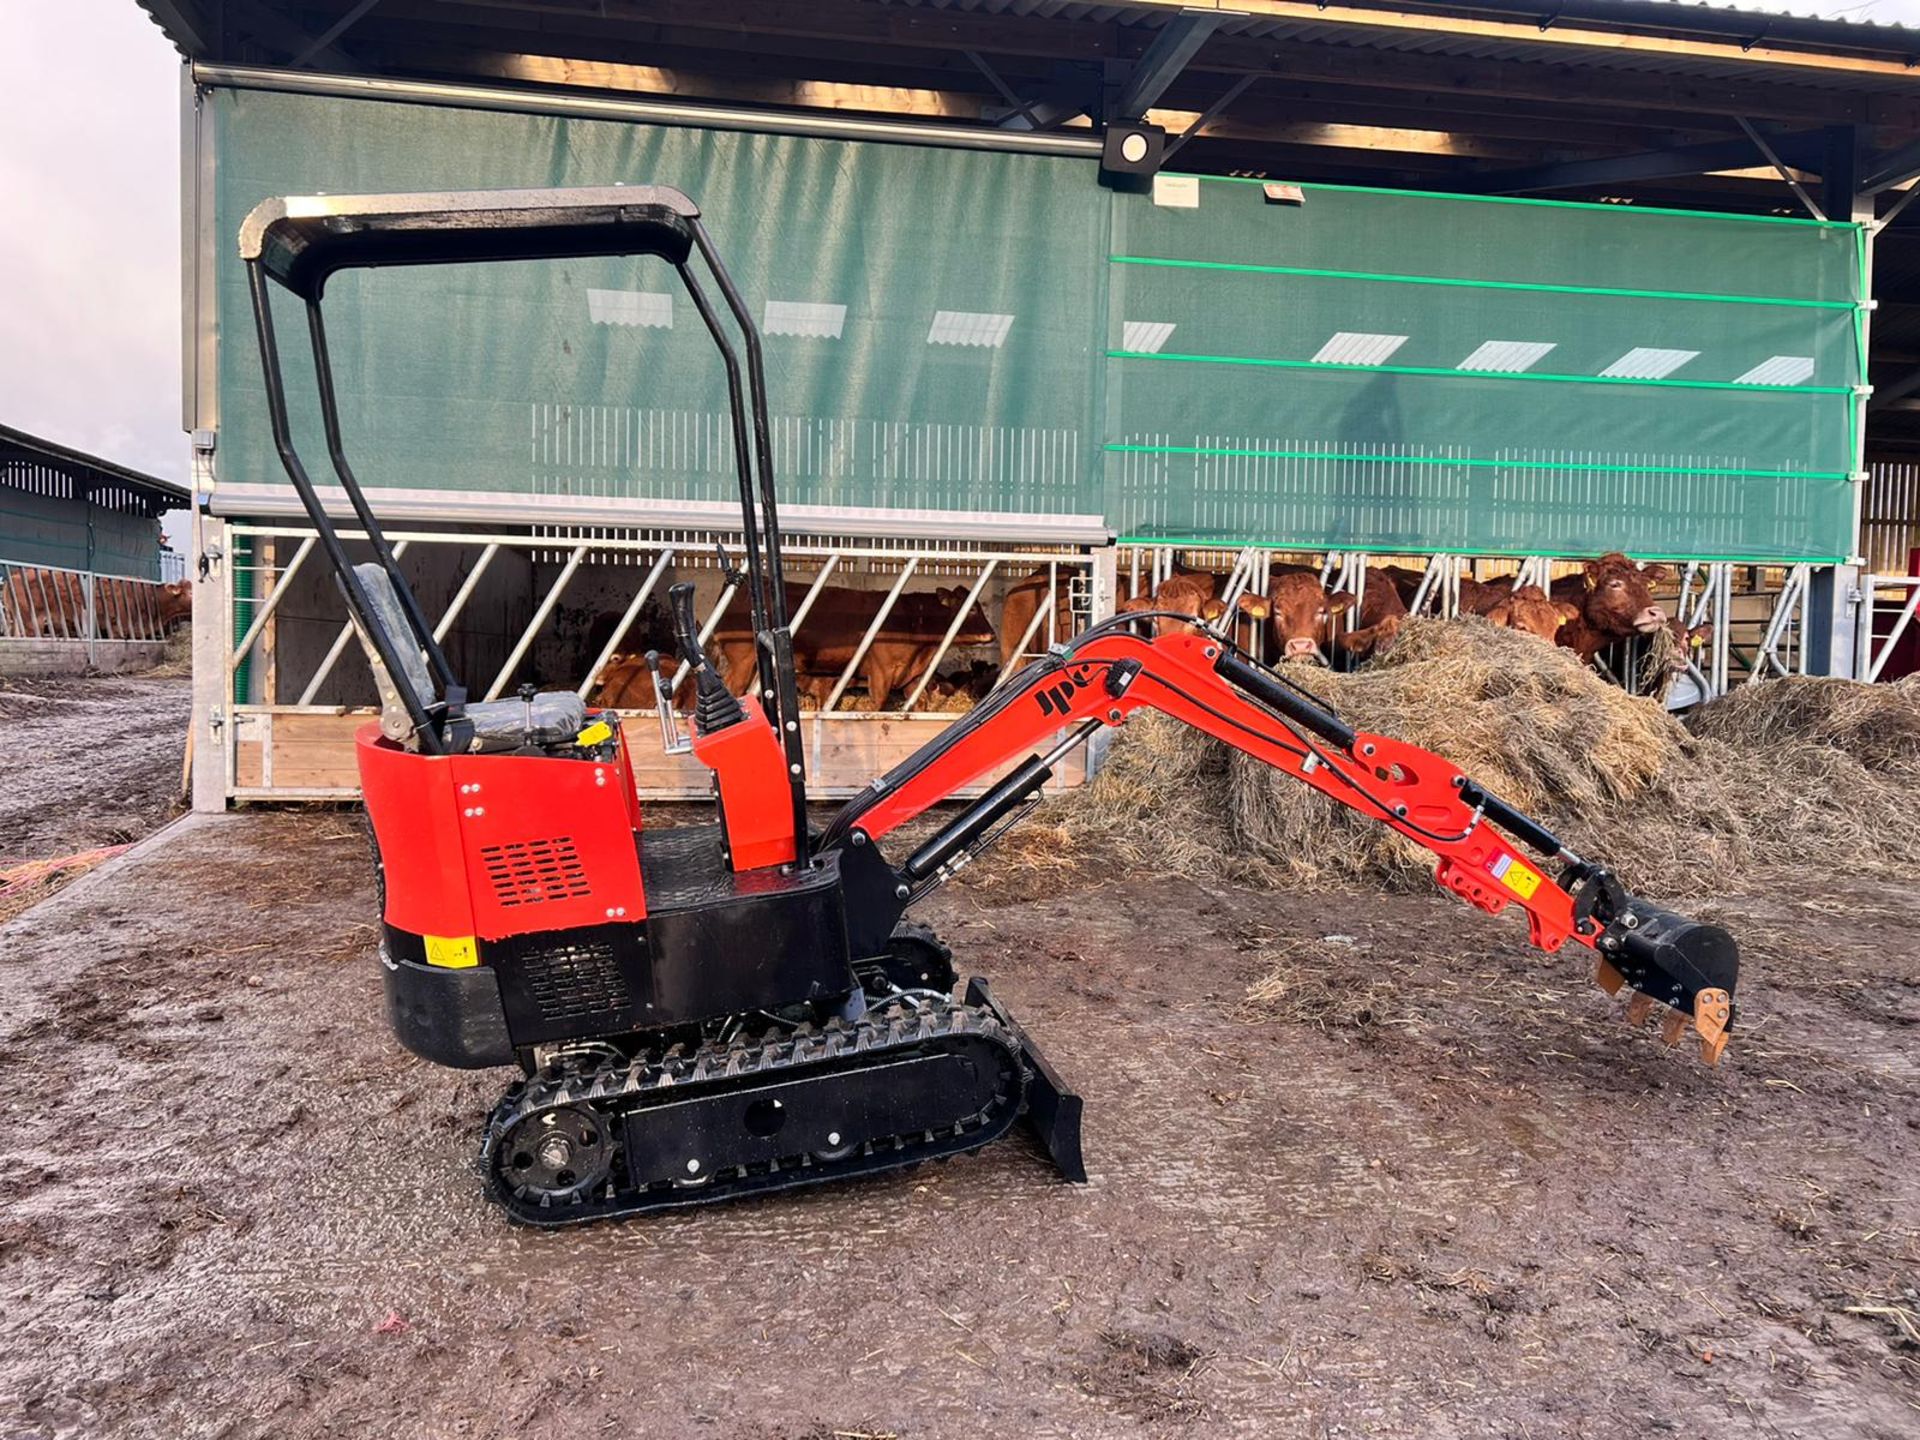 NEW AND UNUSED JPC HT12 1 TON MINI DIGGER, RUNS DRIVES AND DIGS, PIPED FOR FRONT ATTACHMENTS - Image 8 of 11